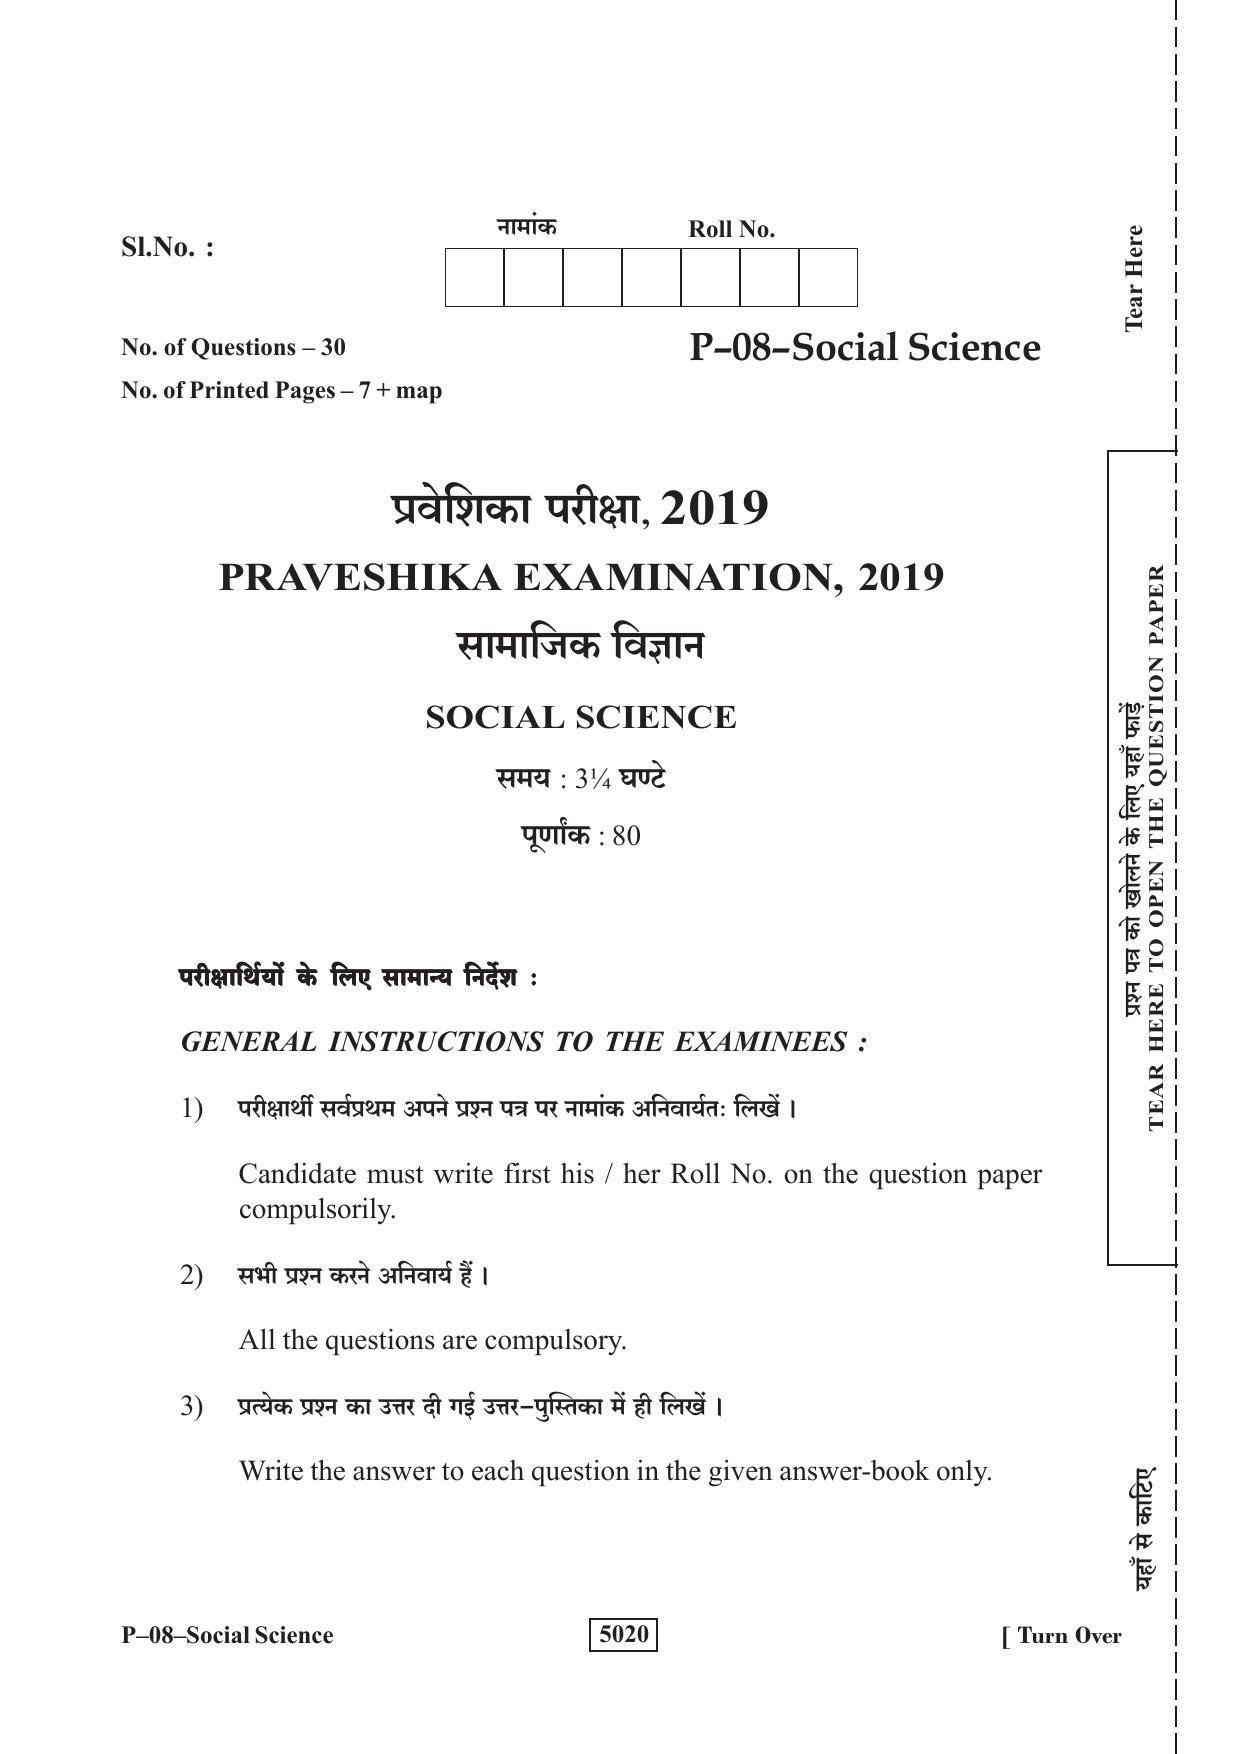 RBSE 2019 Social Science Praveshika Question Paper - Page 1